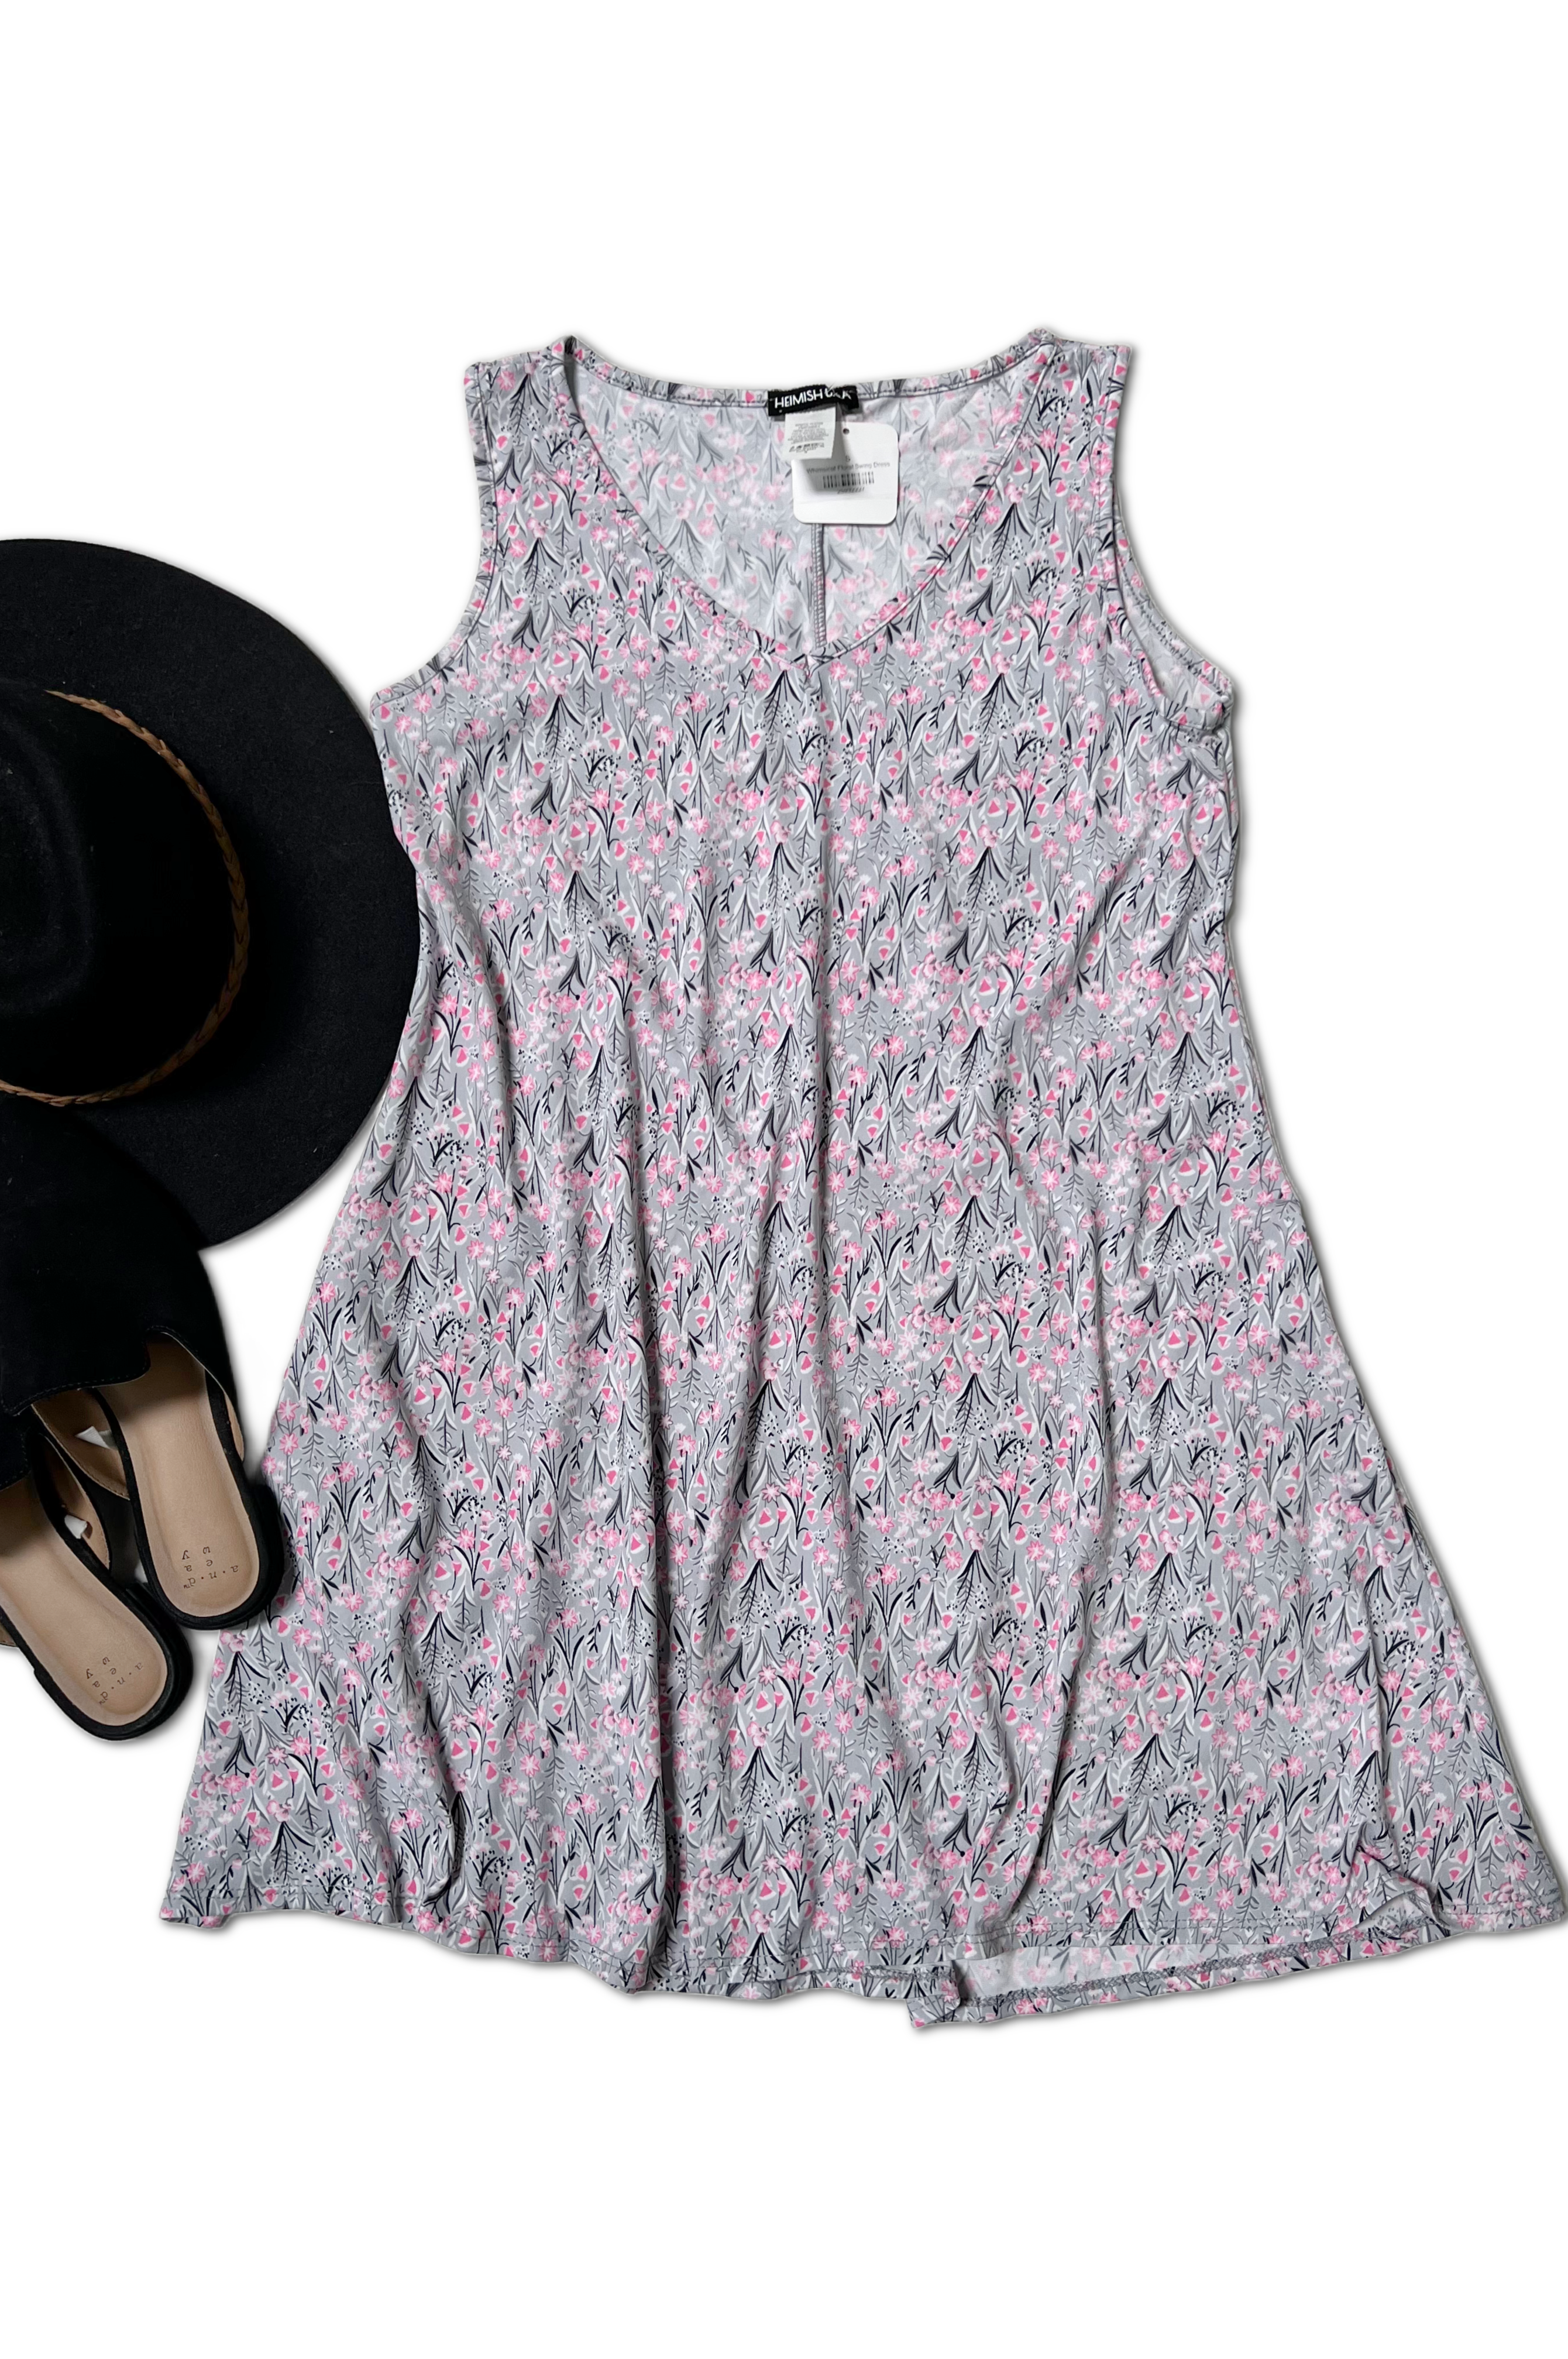 Whimsical Floral Swing Dress Boutique Simplified